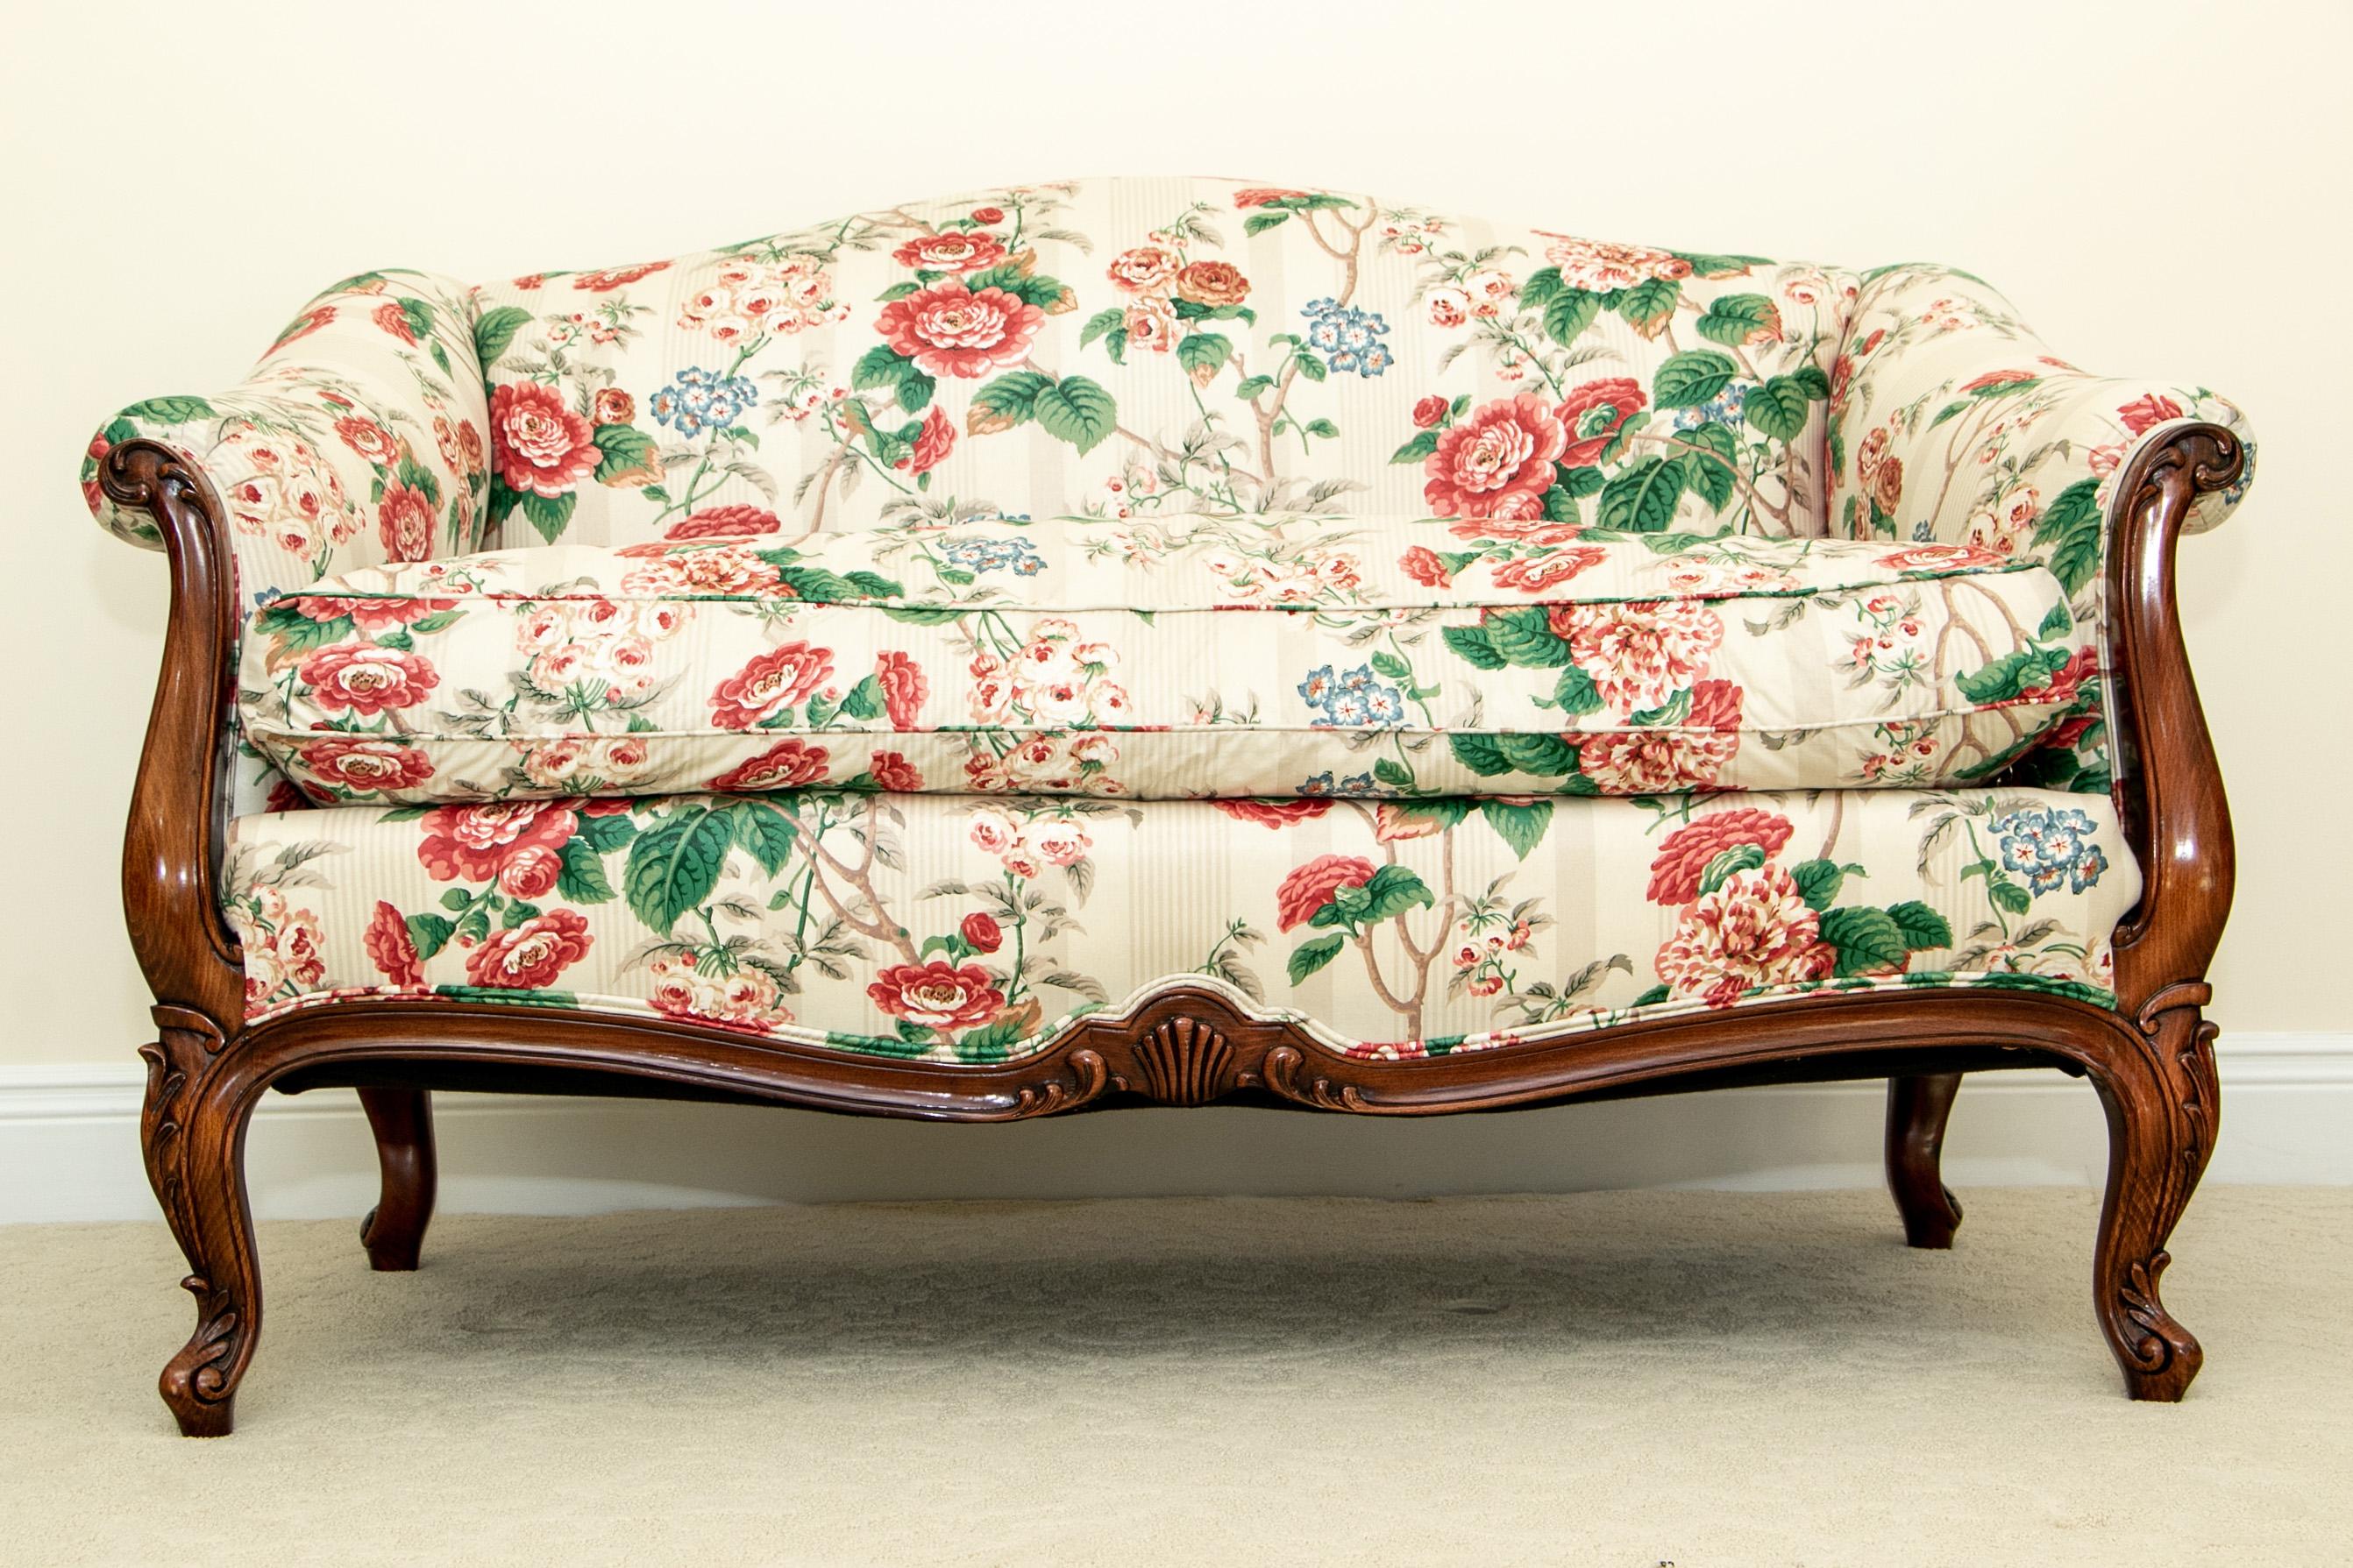 Louis XV style mahogany with shaped crest and carved leafy arms and cabriole legs. The lower front frame with a shell and leafy centre. Finely upholstered in a custom pink rose on gray stripe chintz fabric. Very comfortable seat cushions.